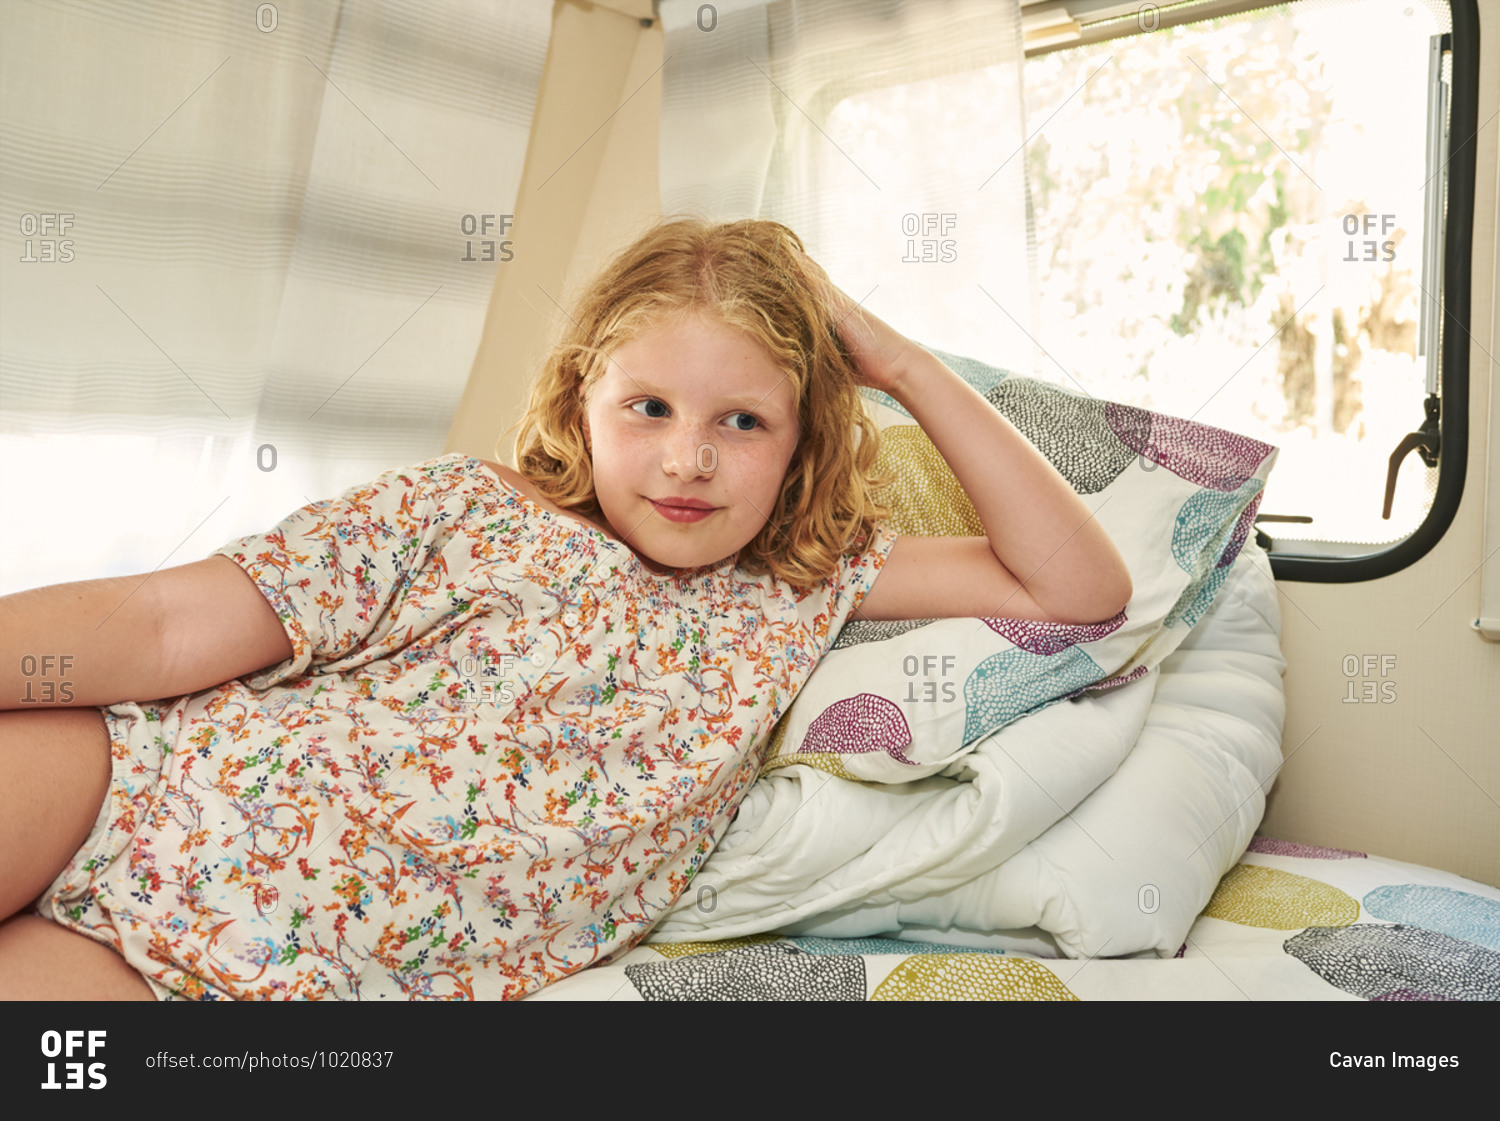 Girl lying in a caravan. she is relaxed on her vacation.